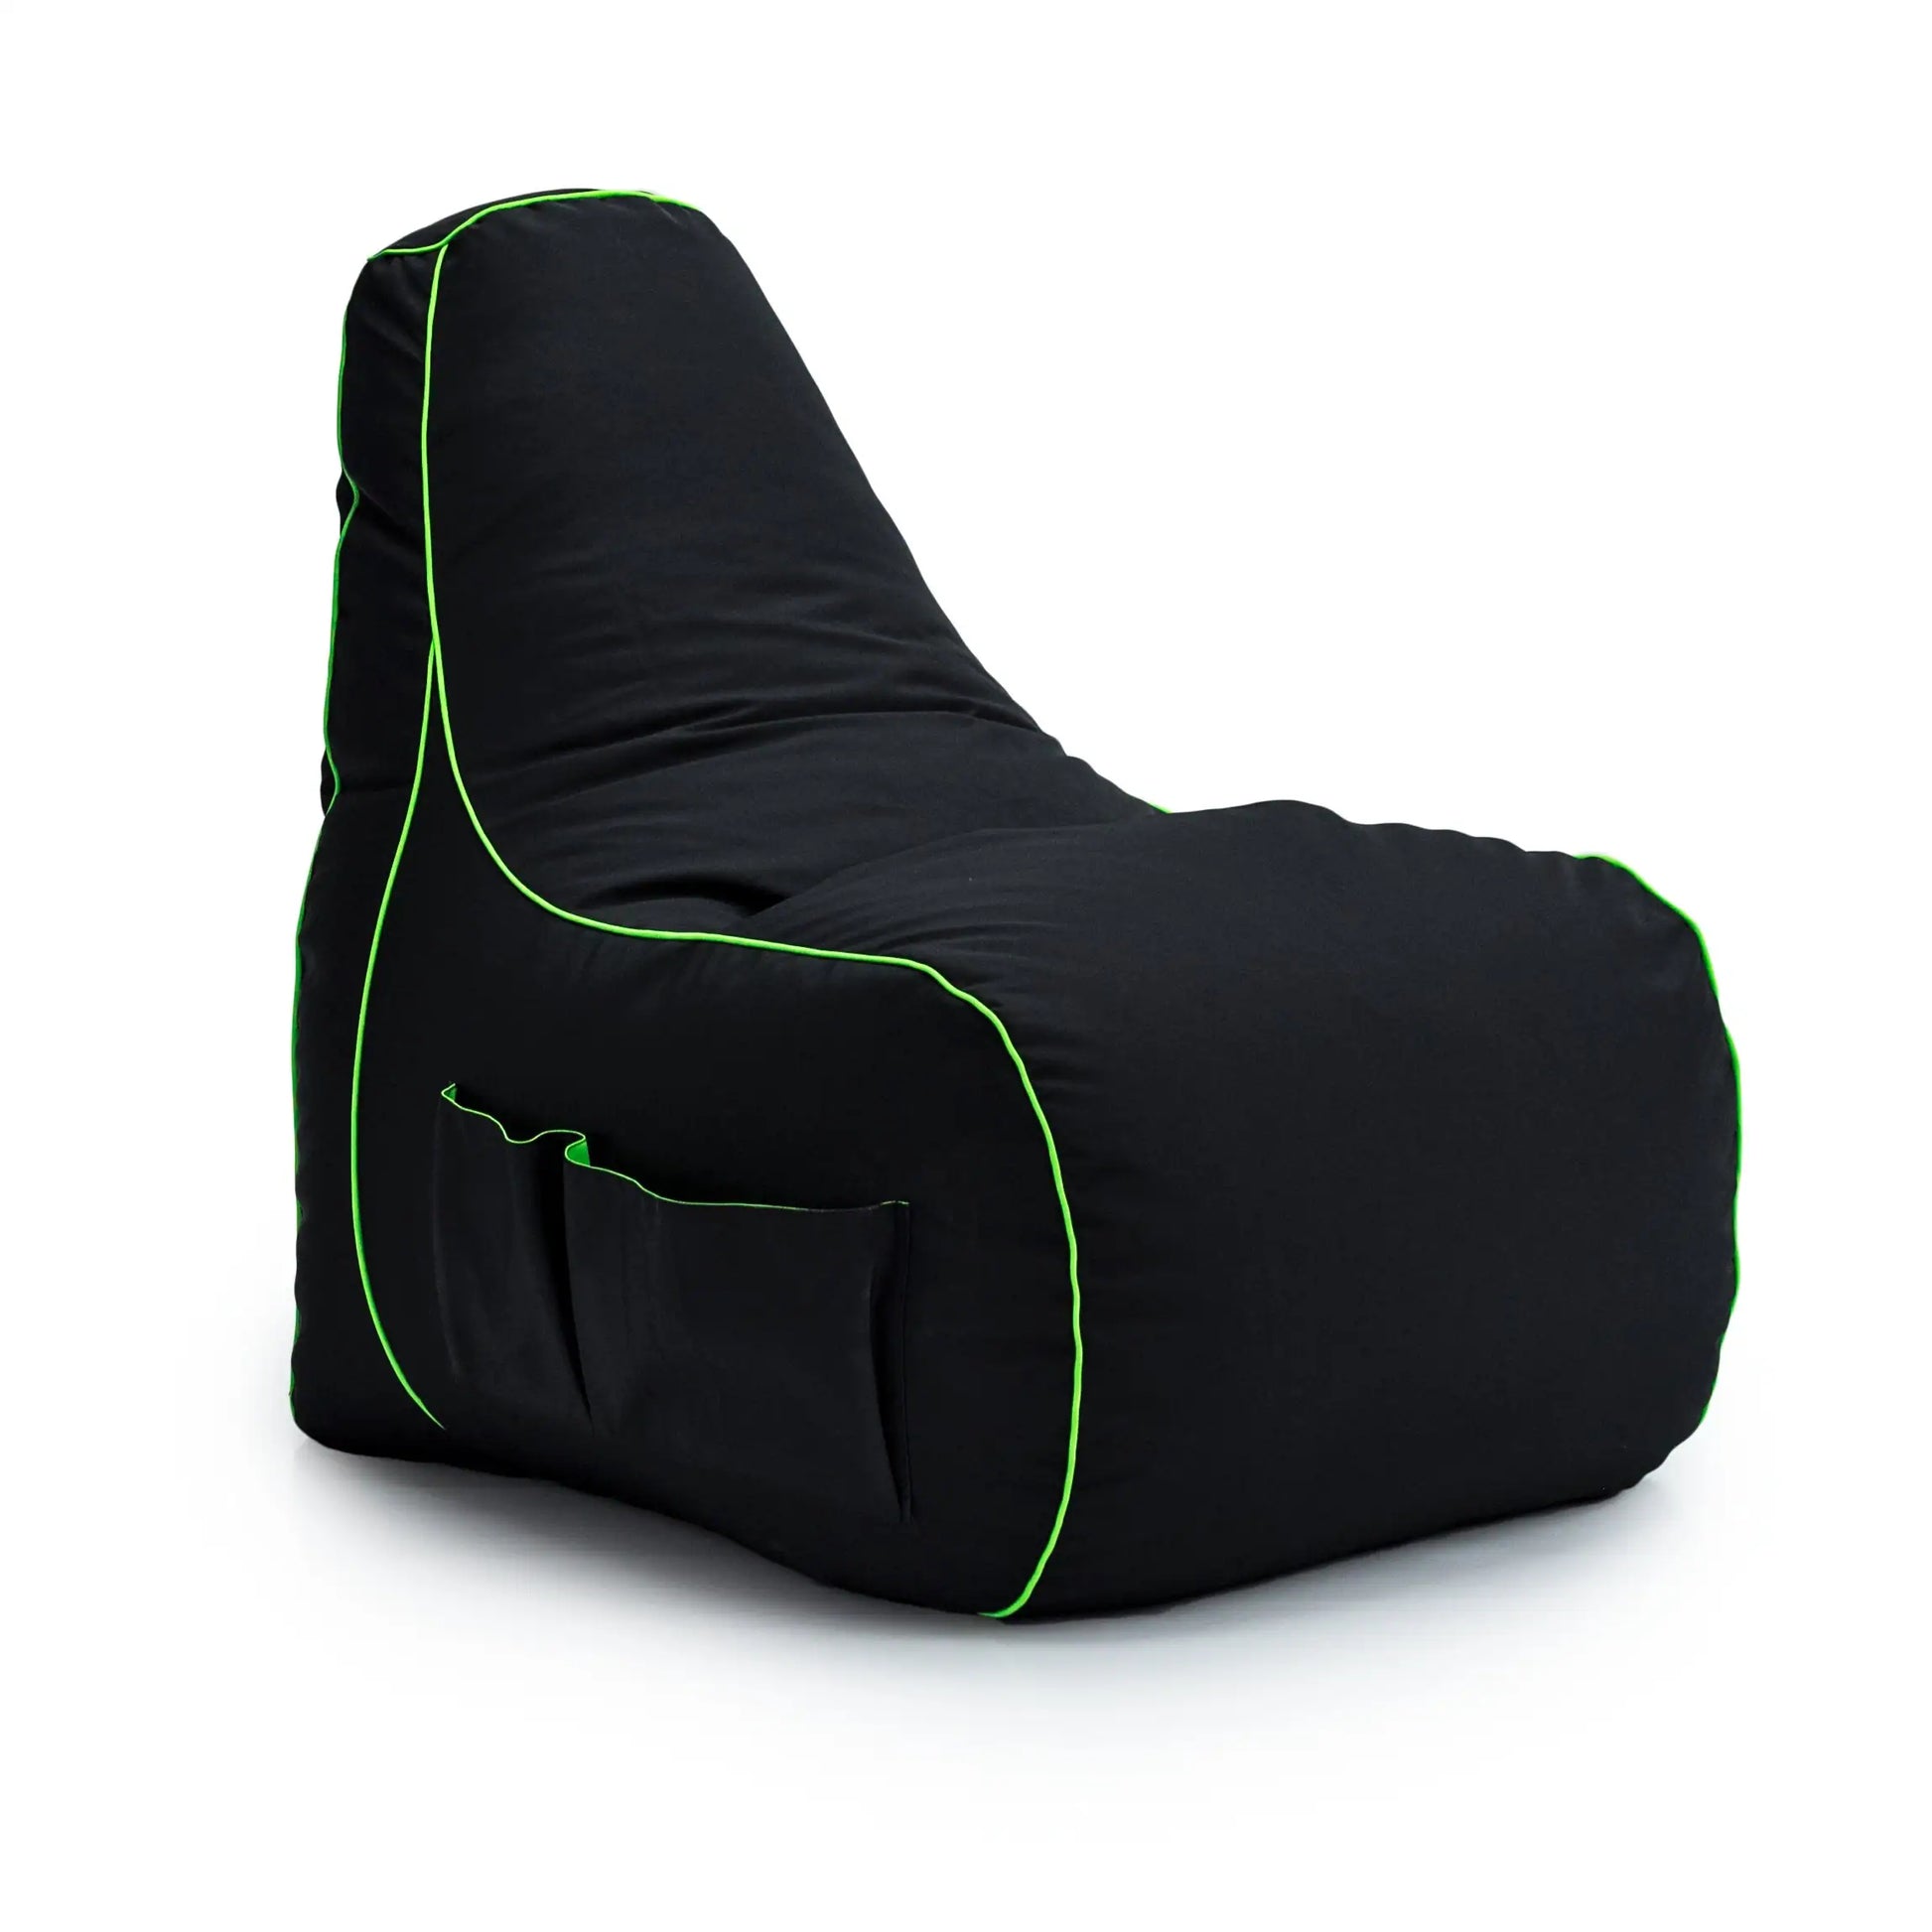 Black bean bag chair with neon green trim on a white background.